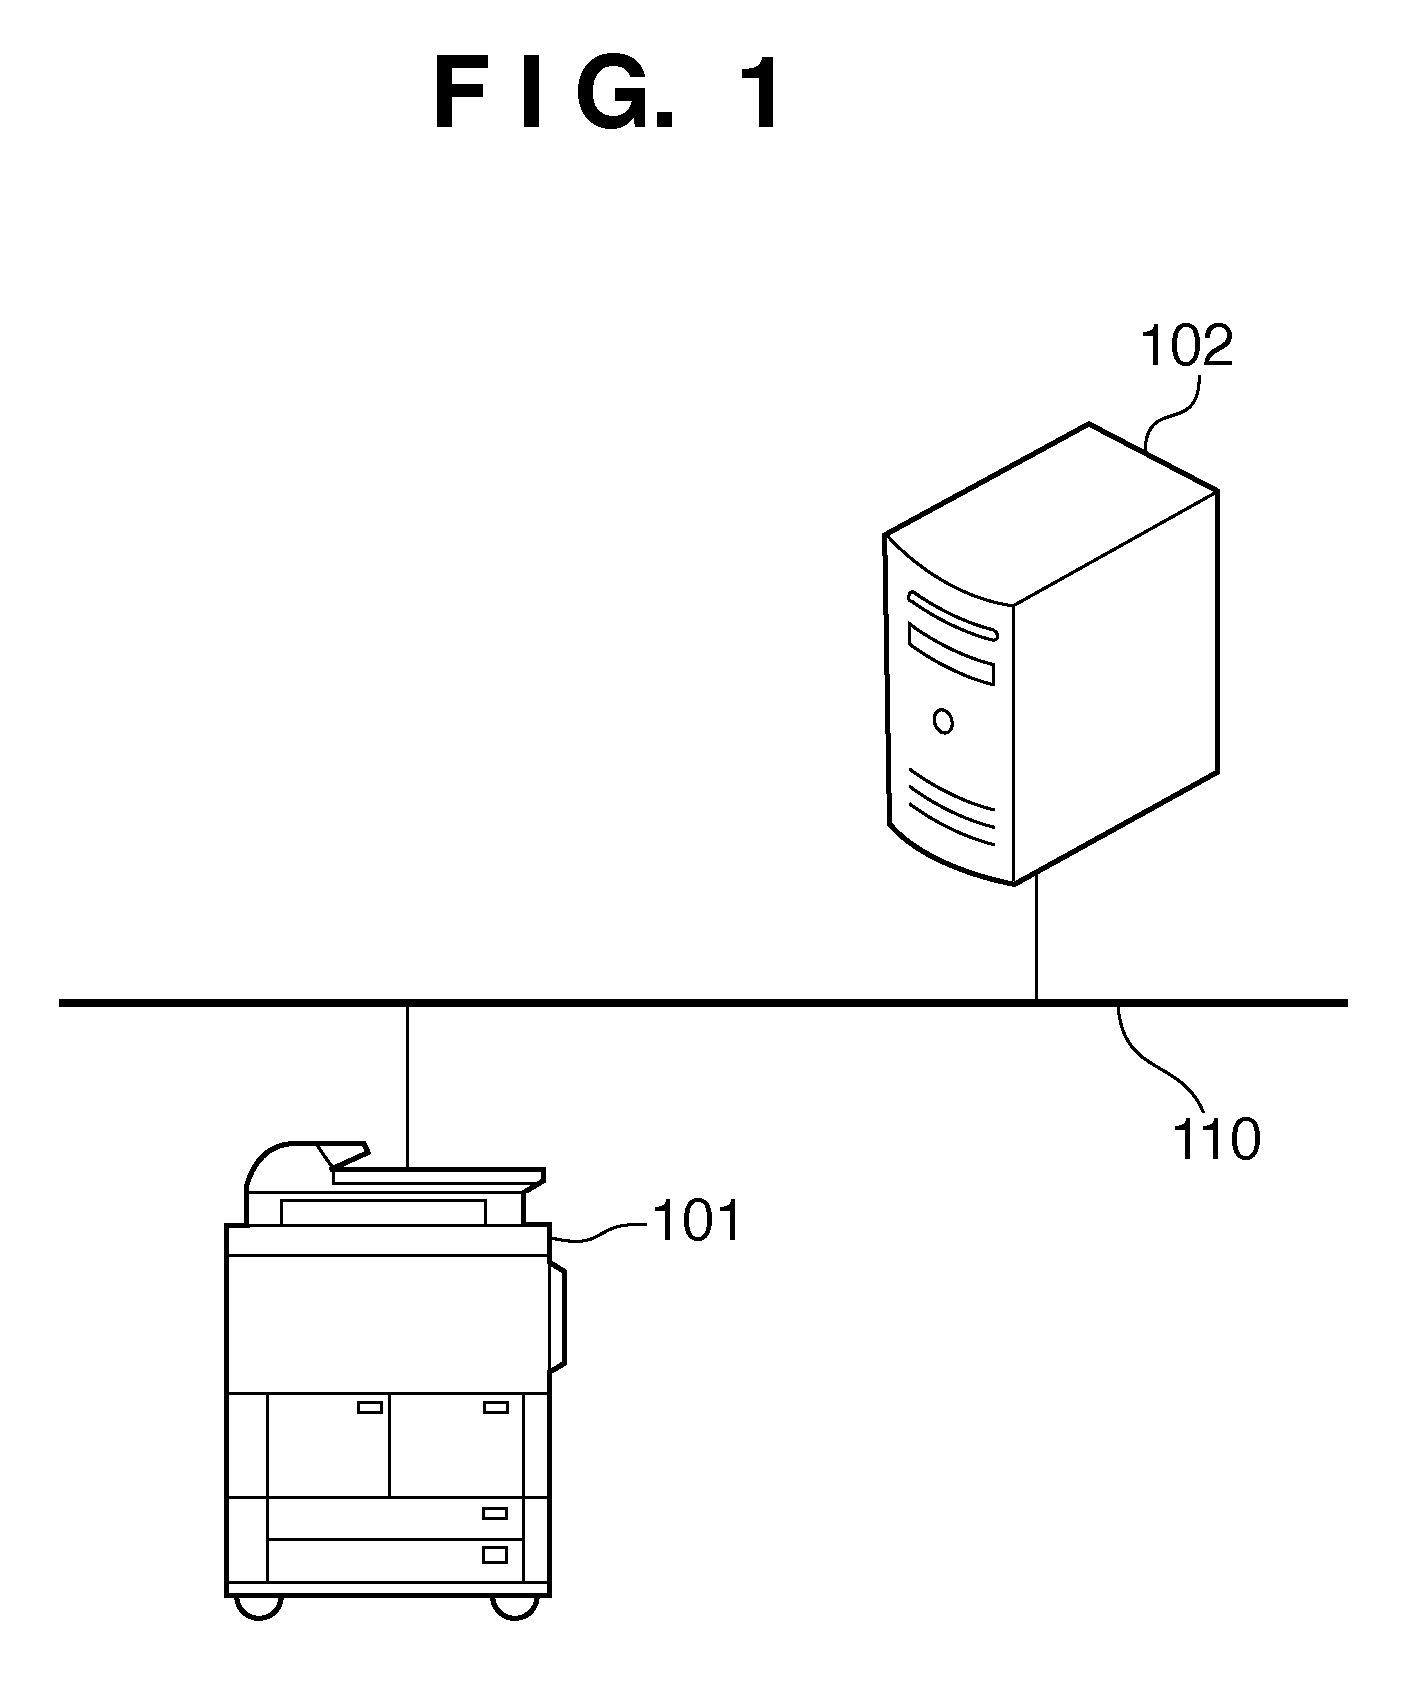 Restricting a screen transition instruction based on a status of execution of a job instructed by a web server